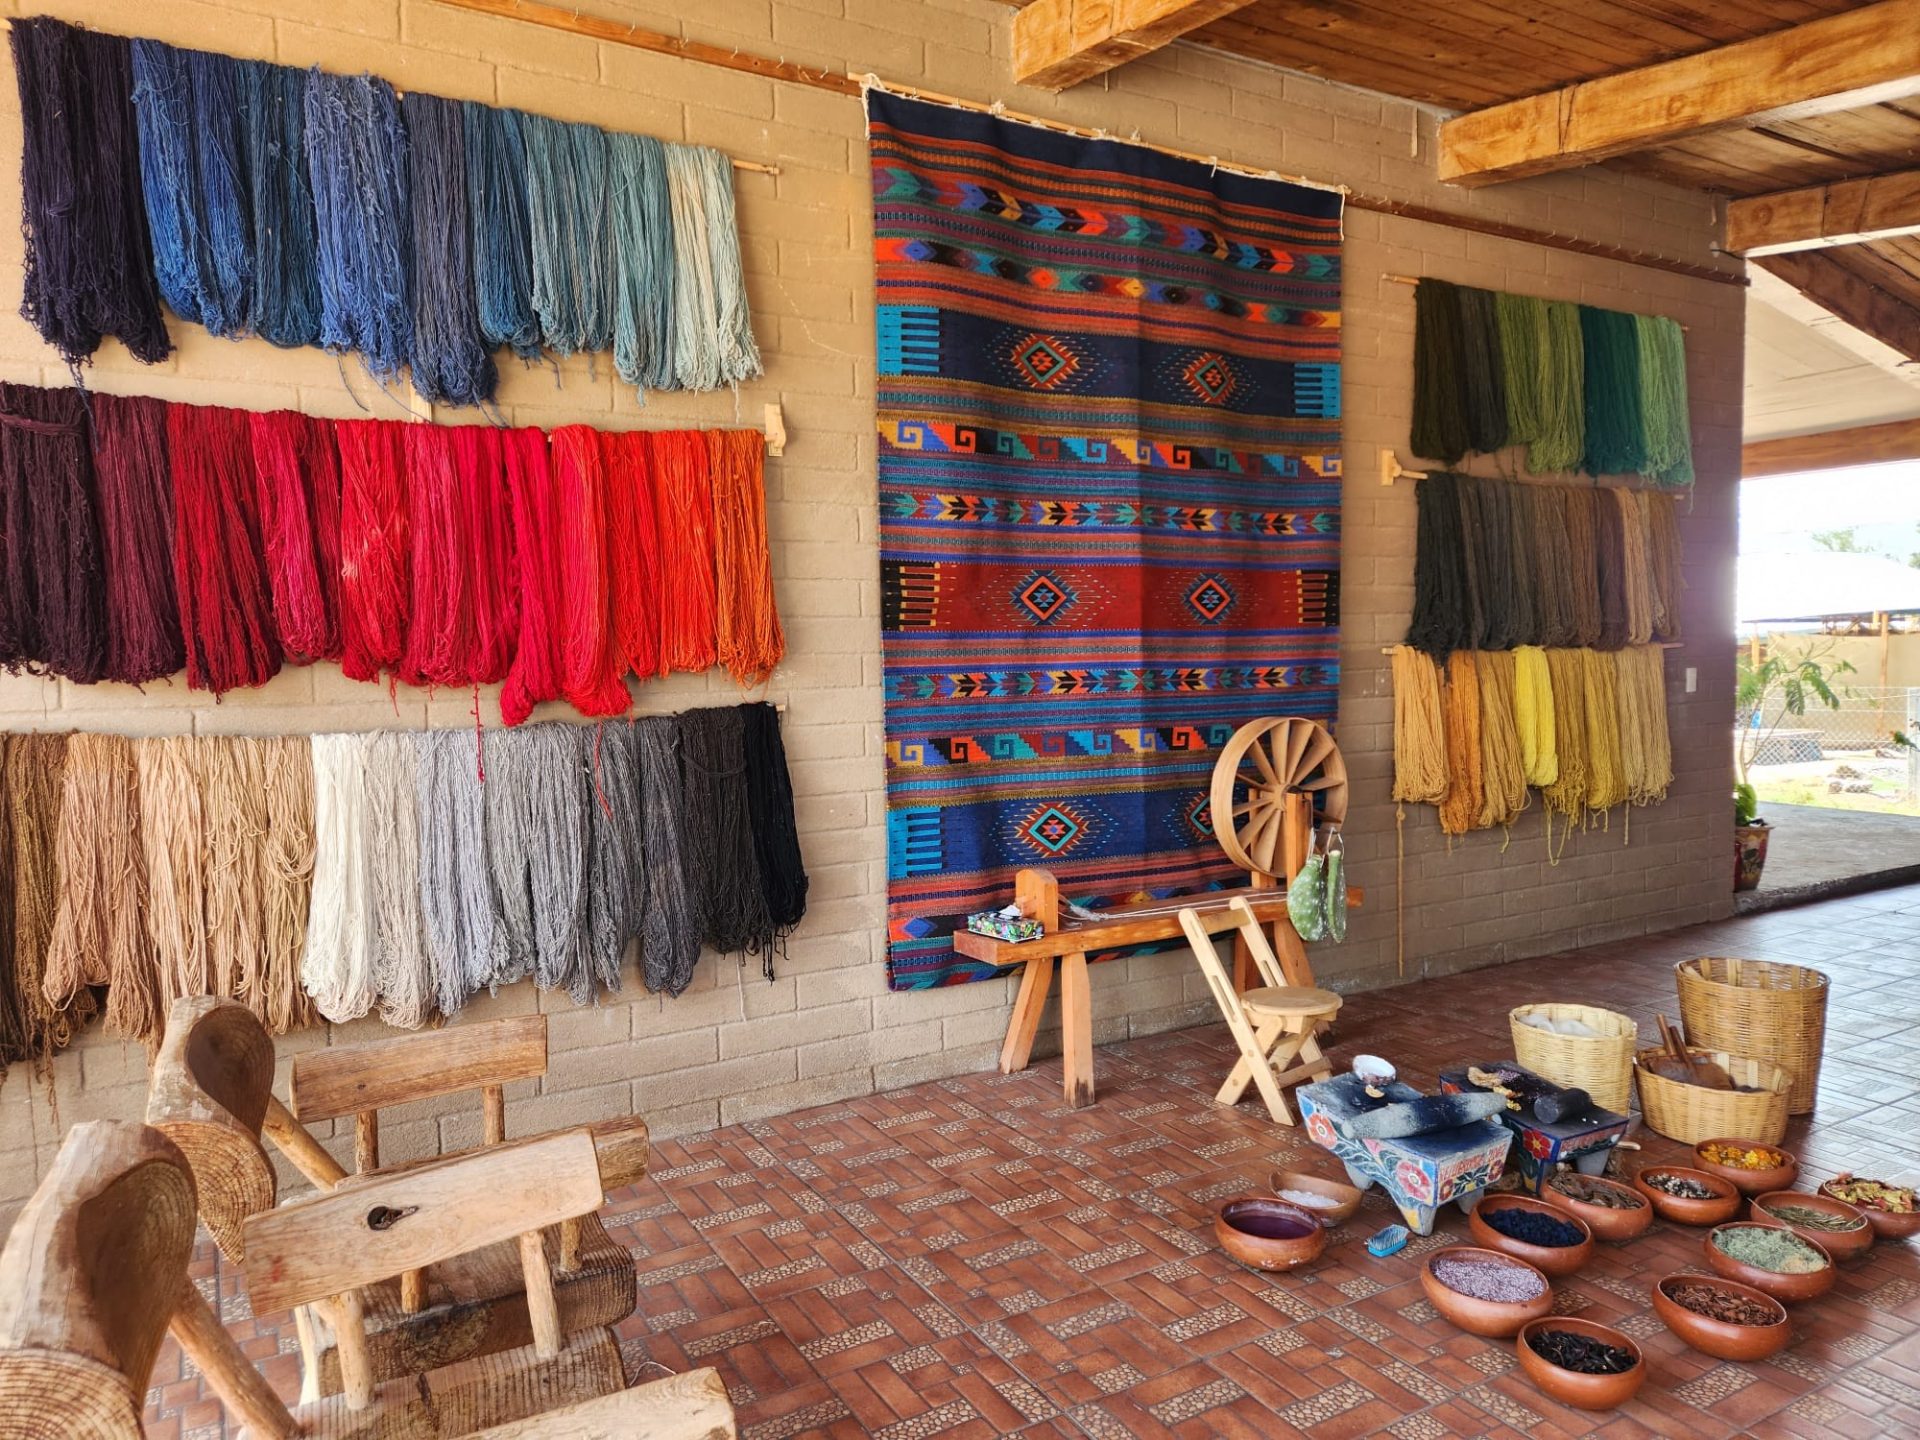 Mexican rugs and blankets Photo Credit: Arturo Sanchez